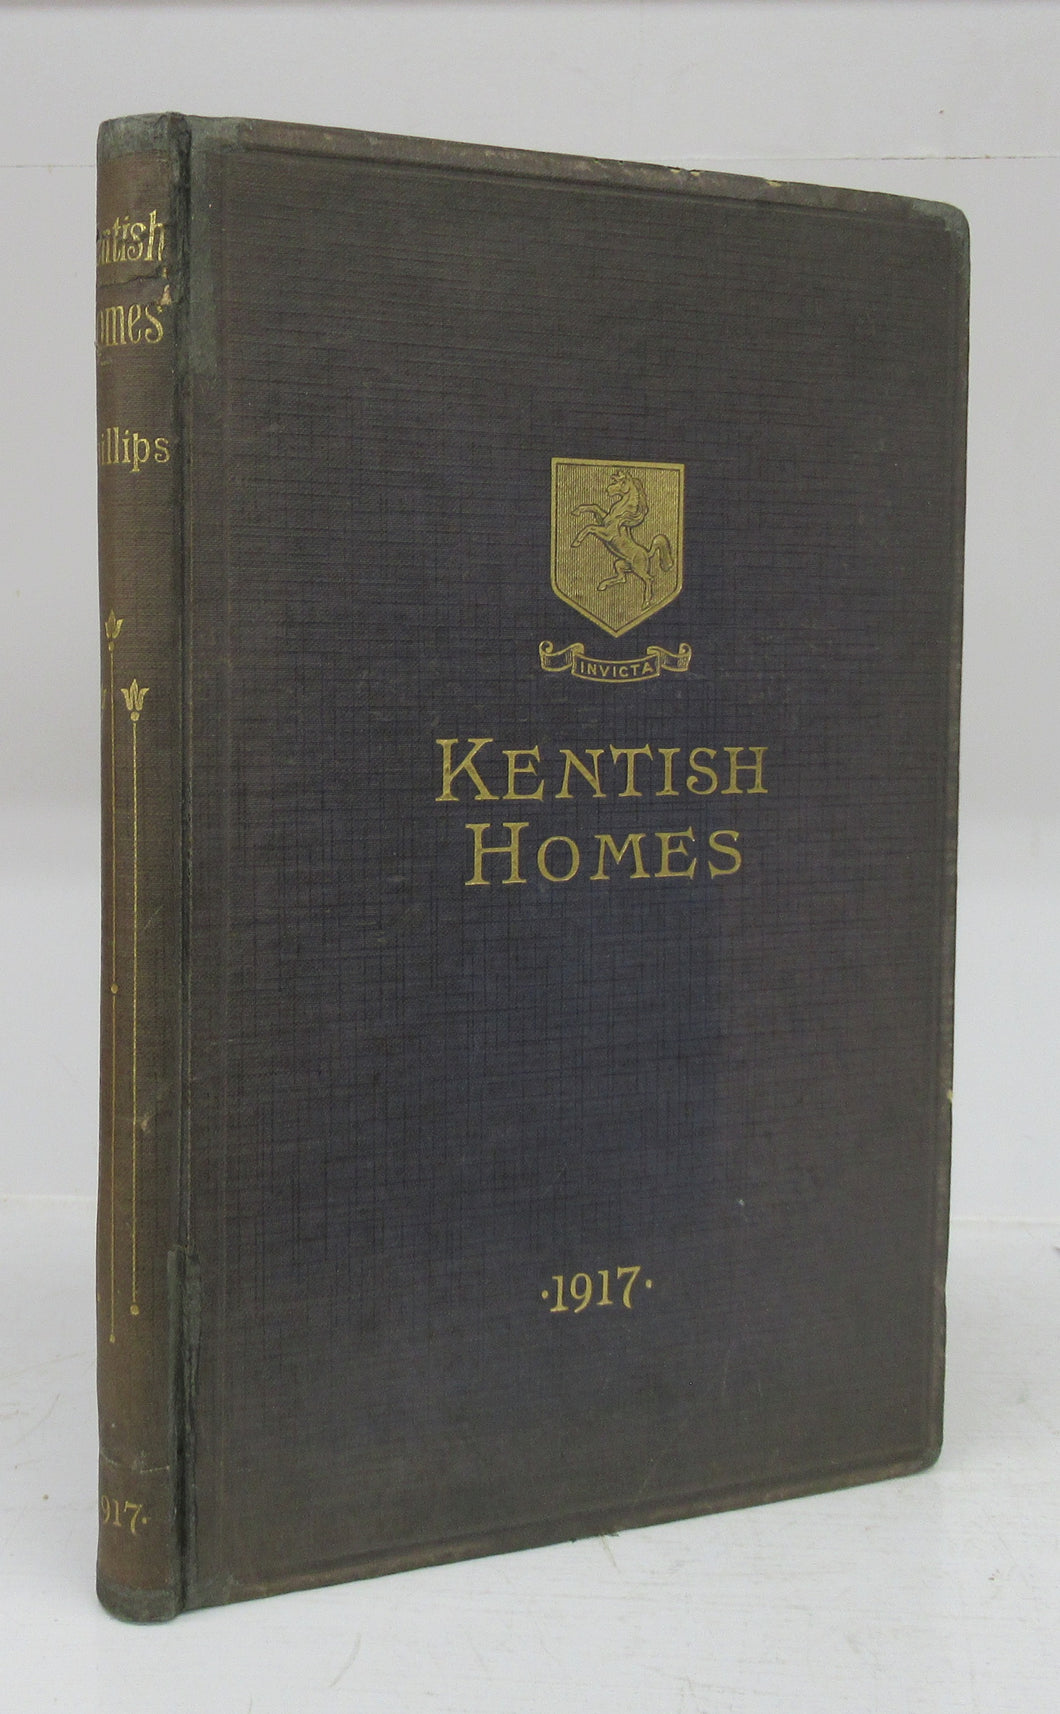 Kentish Homes: Visited by the Staff and Nurses of the Ontario Military Hospital, Orpington, Kent, in 1916